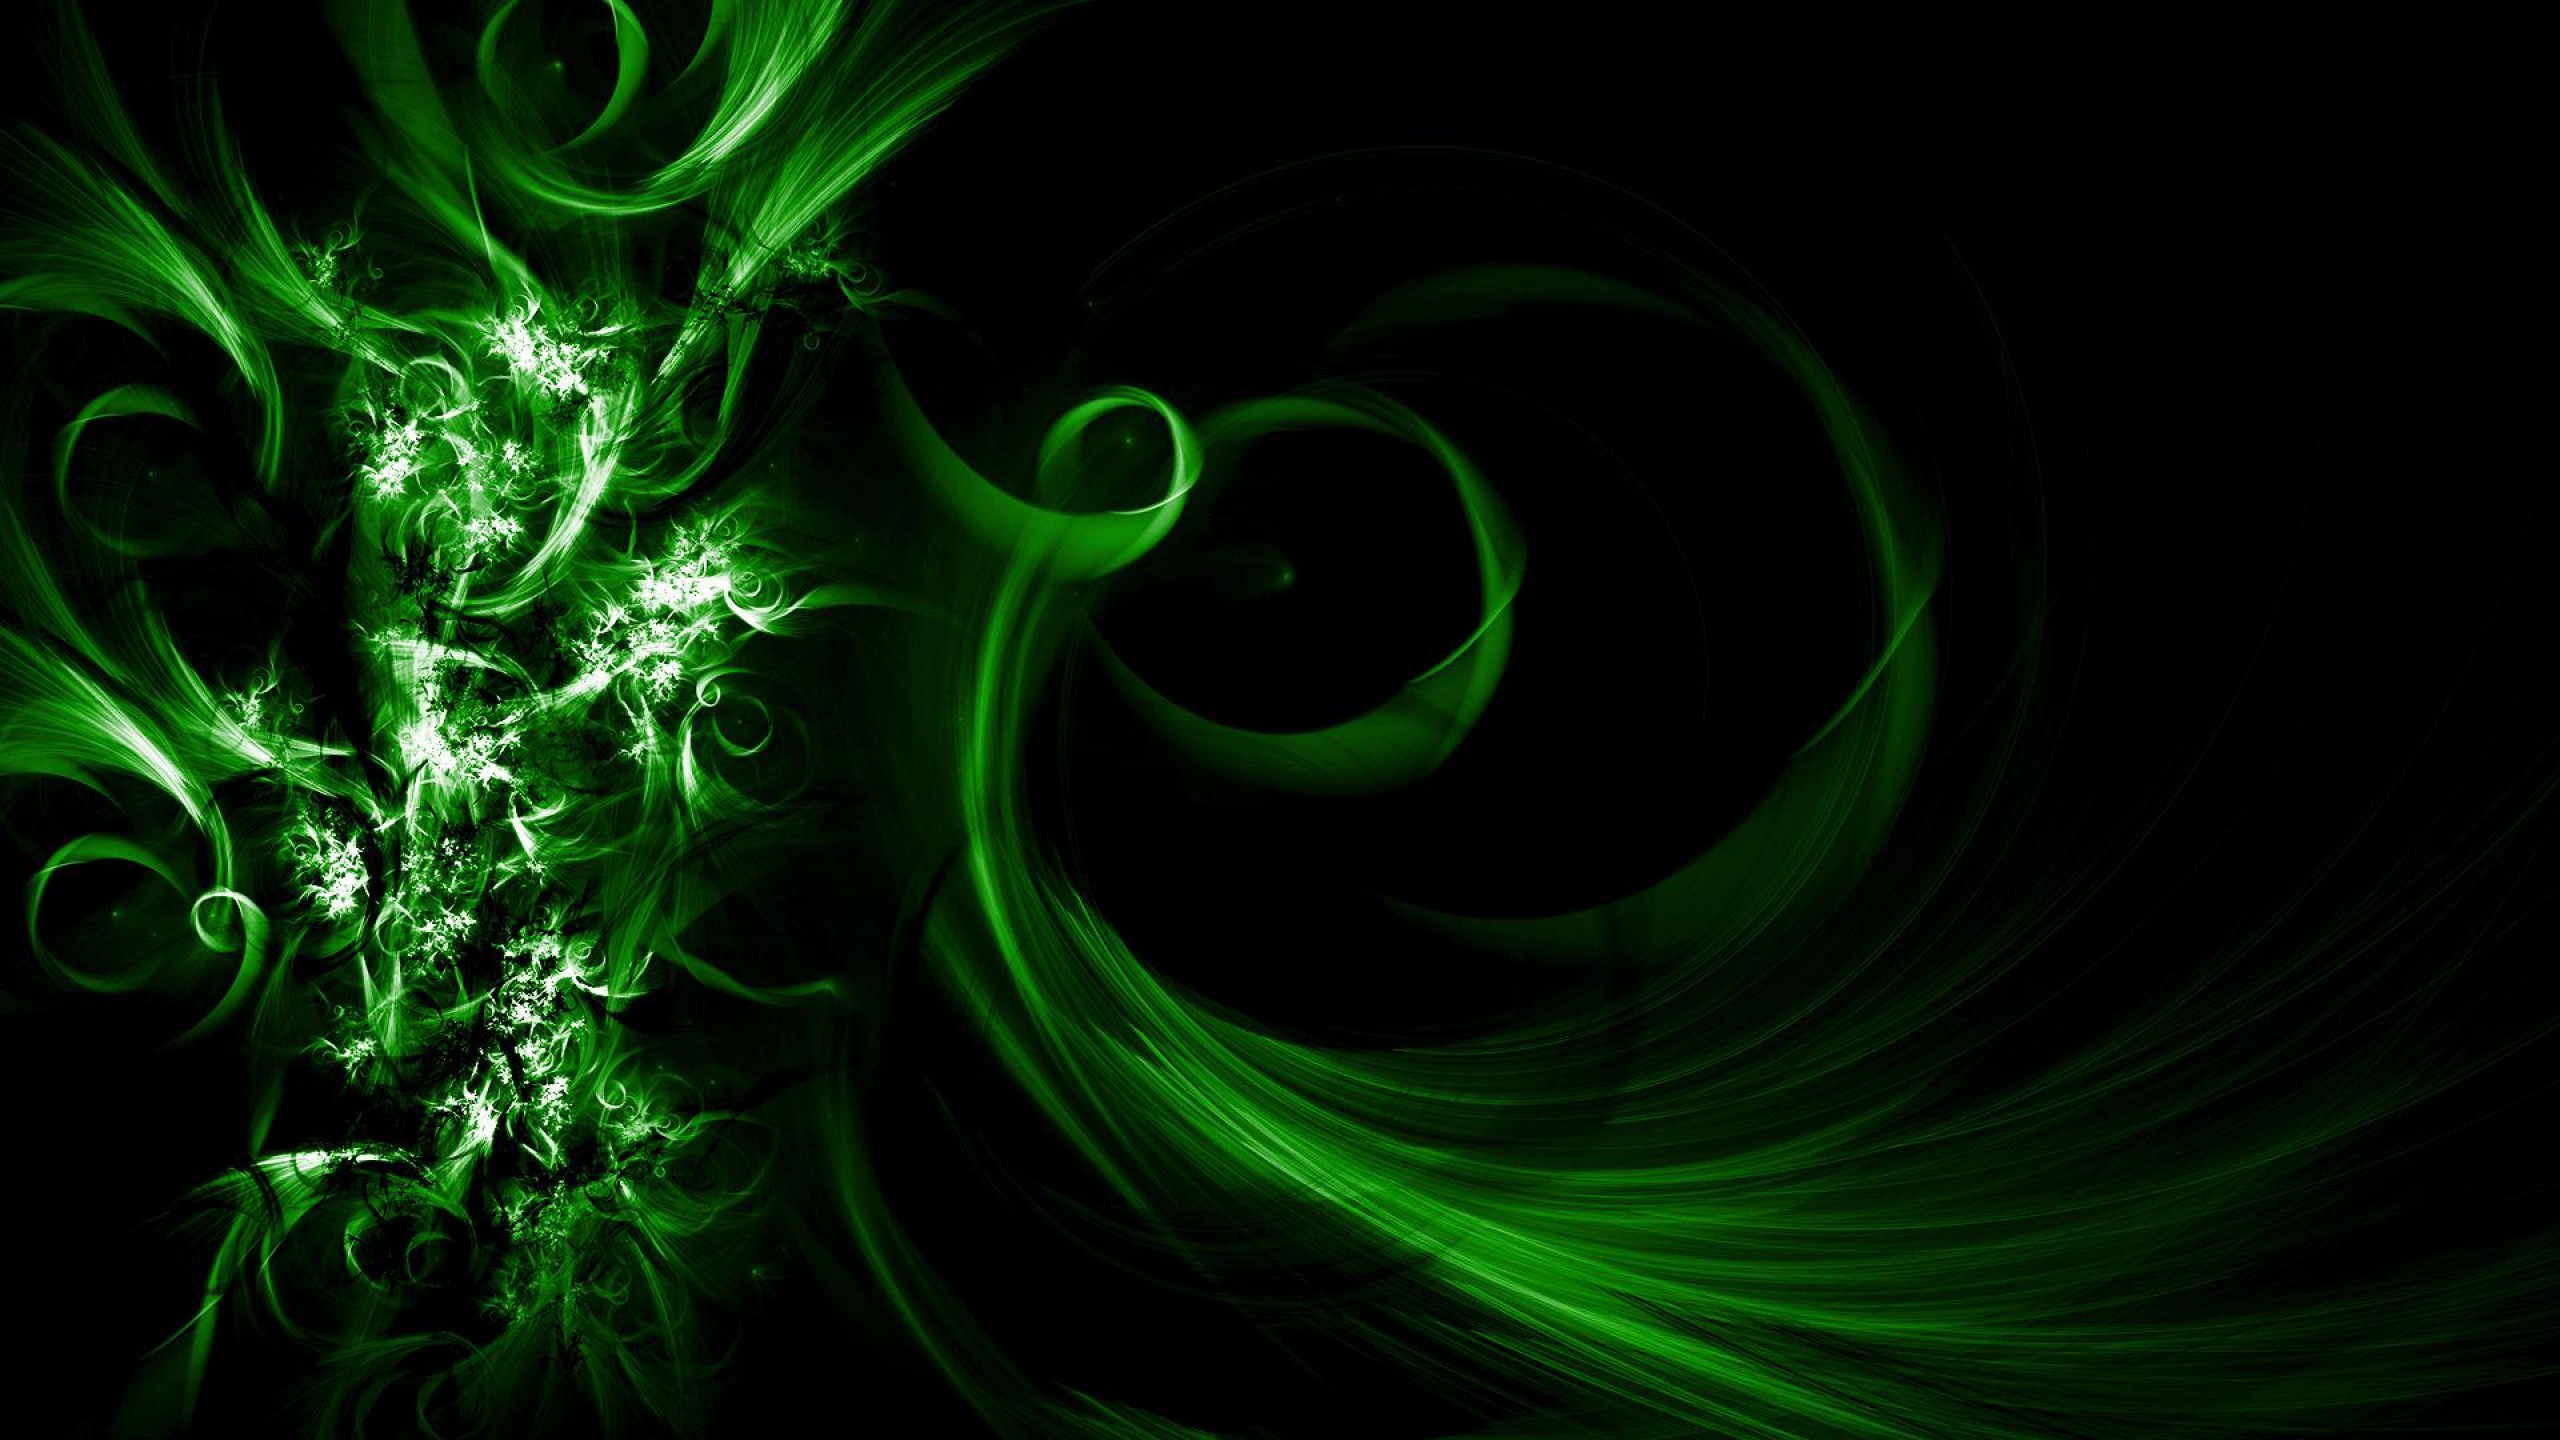 Download Cool Abstract Wallpapers HD Pictures In High Definition Or